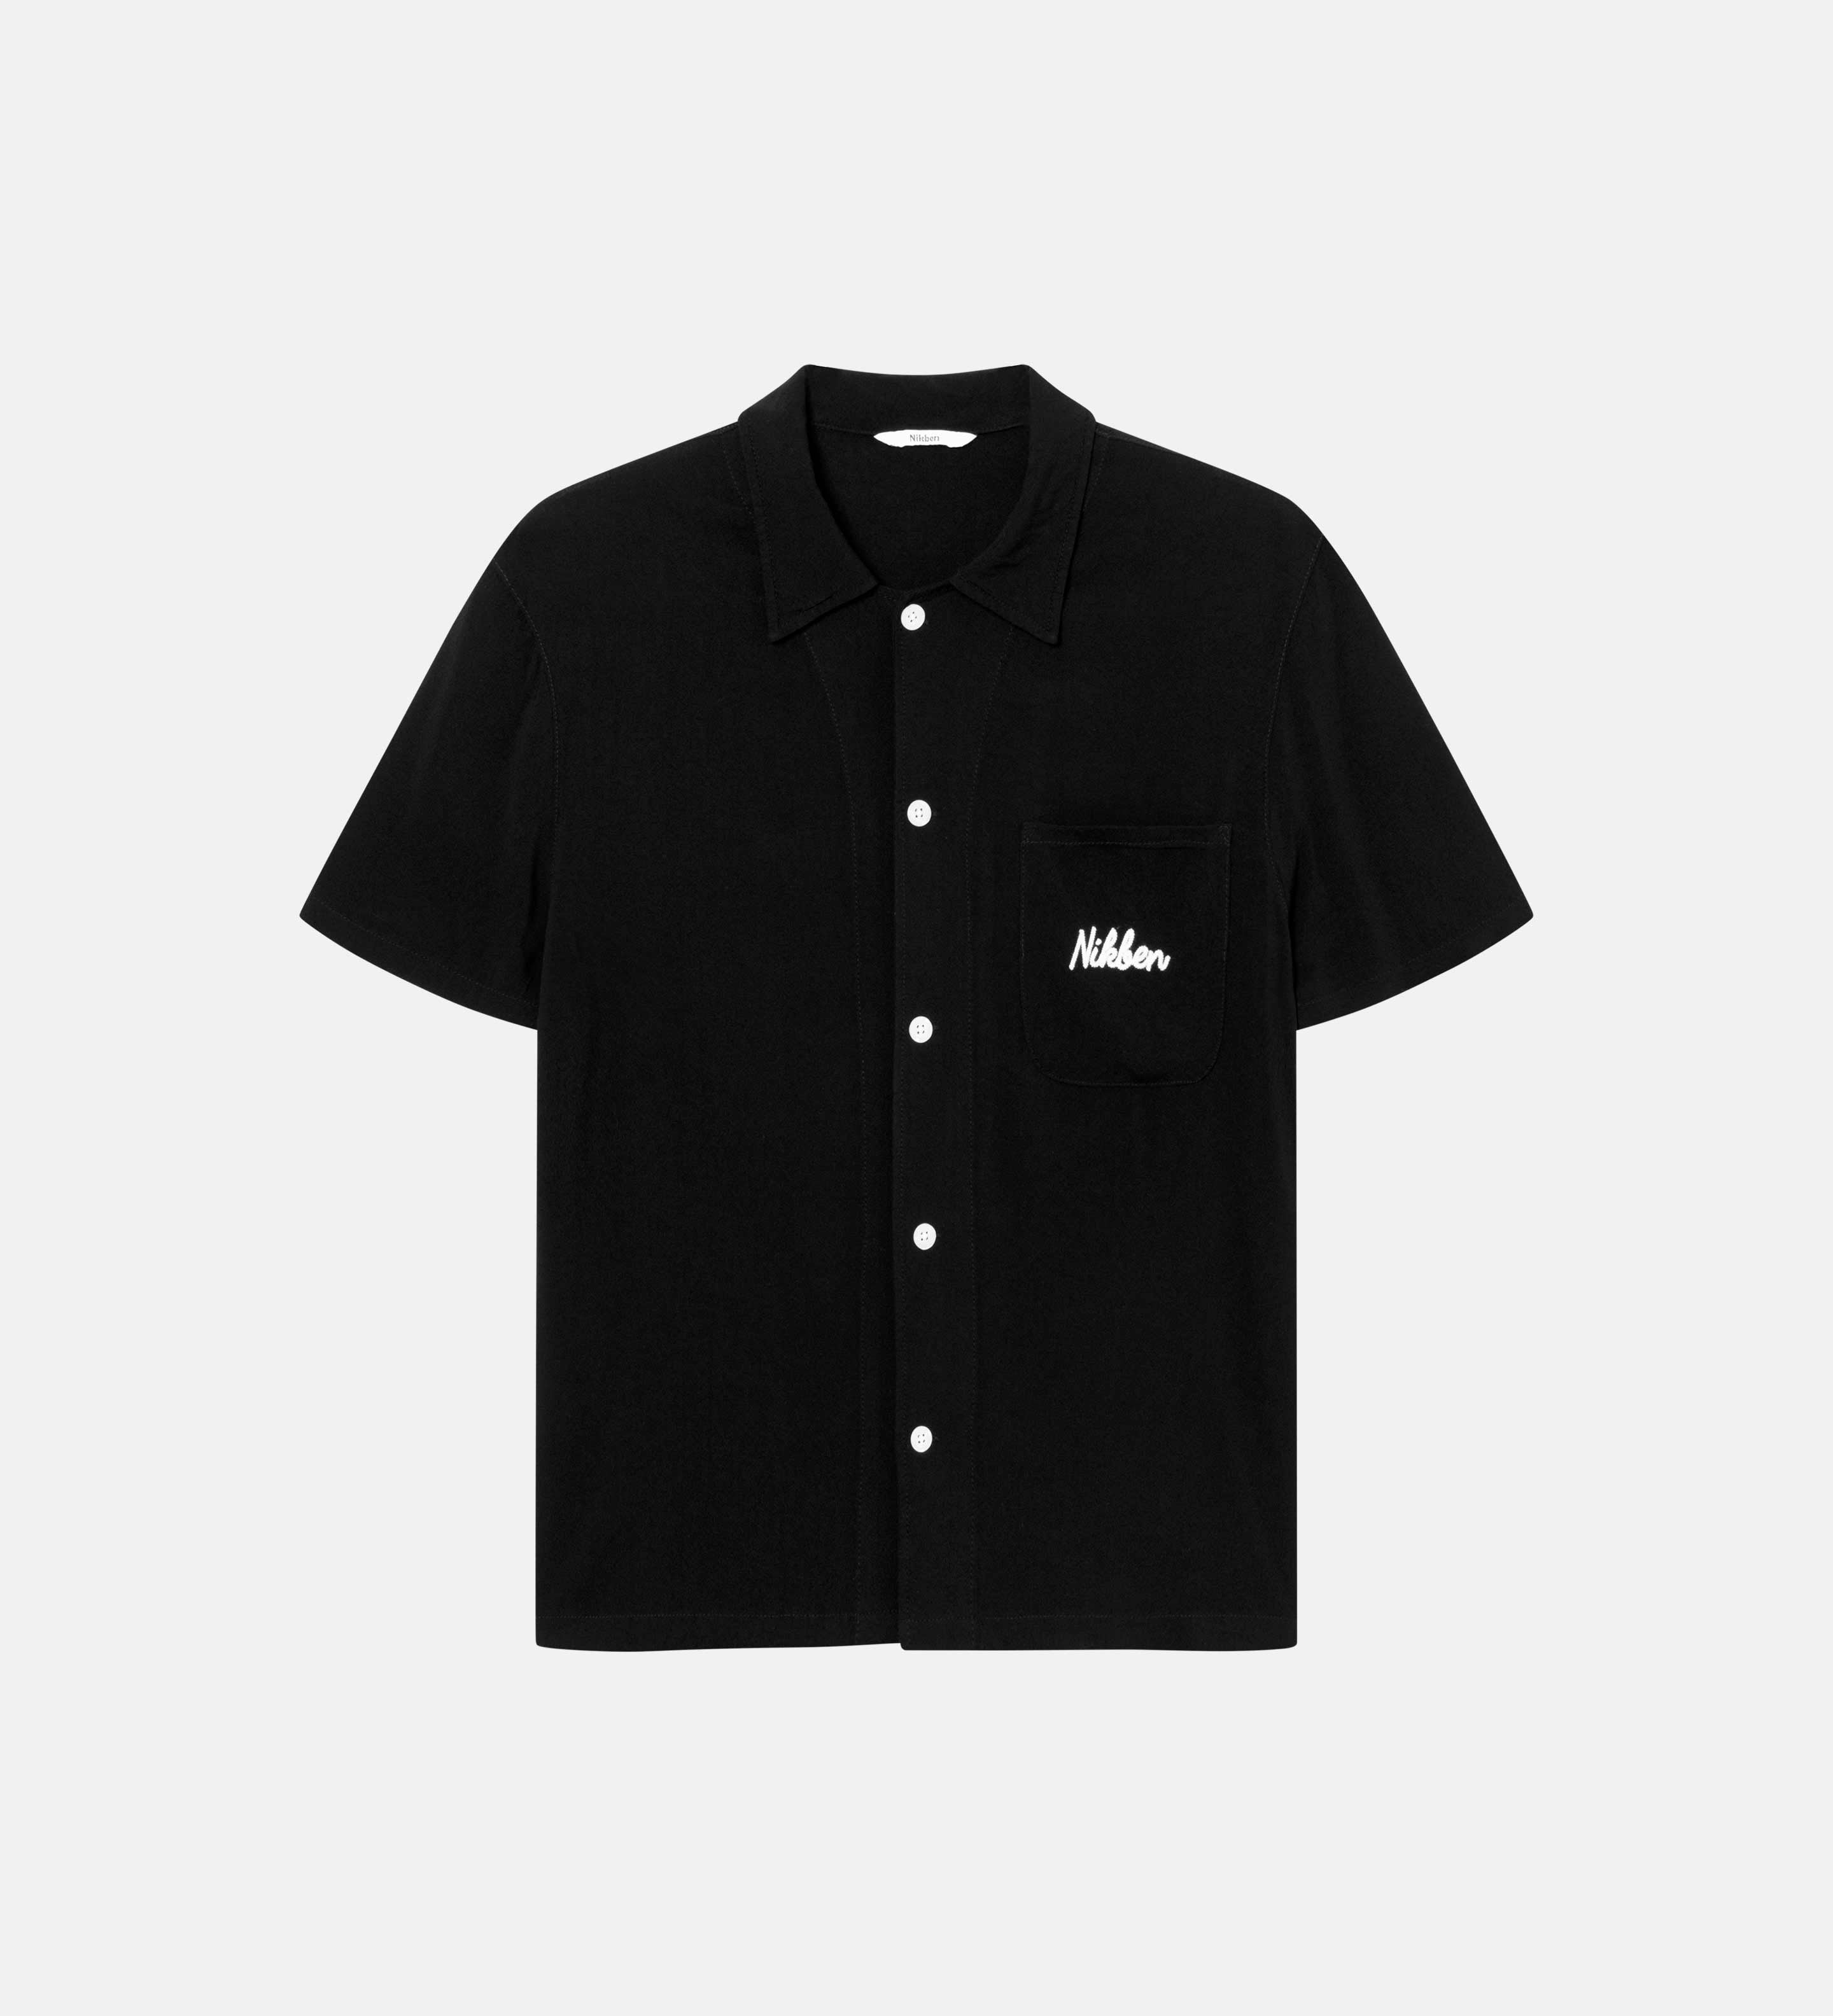 Black short-sleeved shirt with white button closure and embroidered Nikben logo on breast pocket